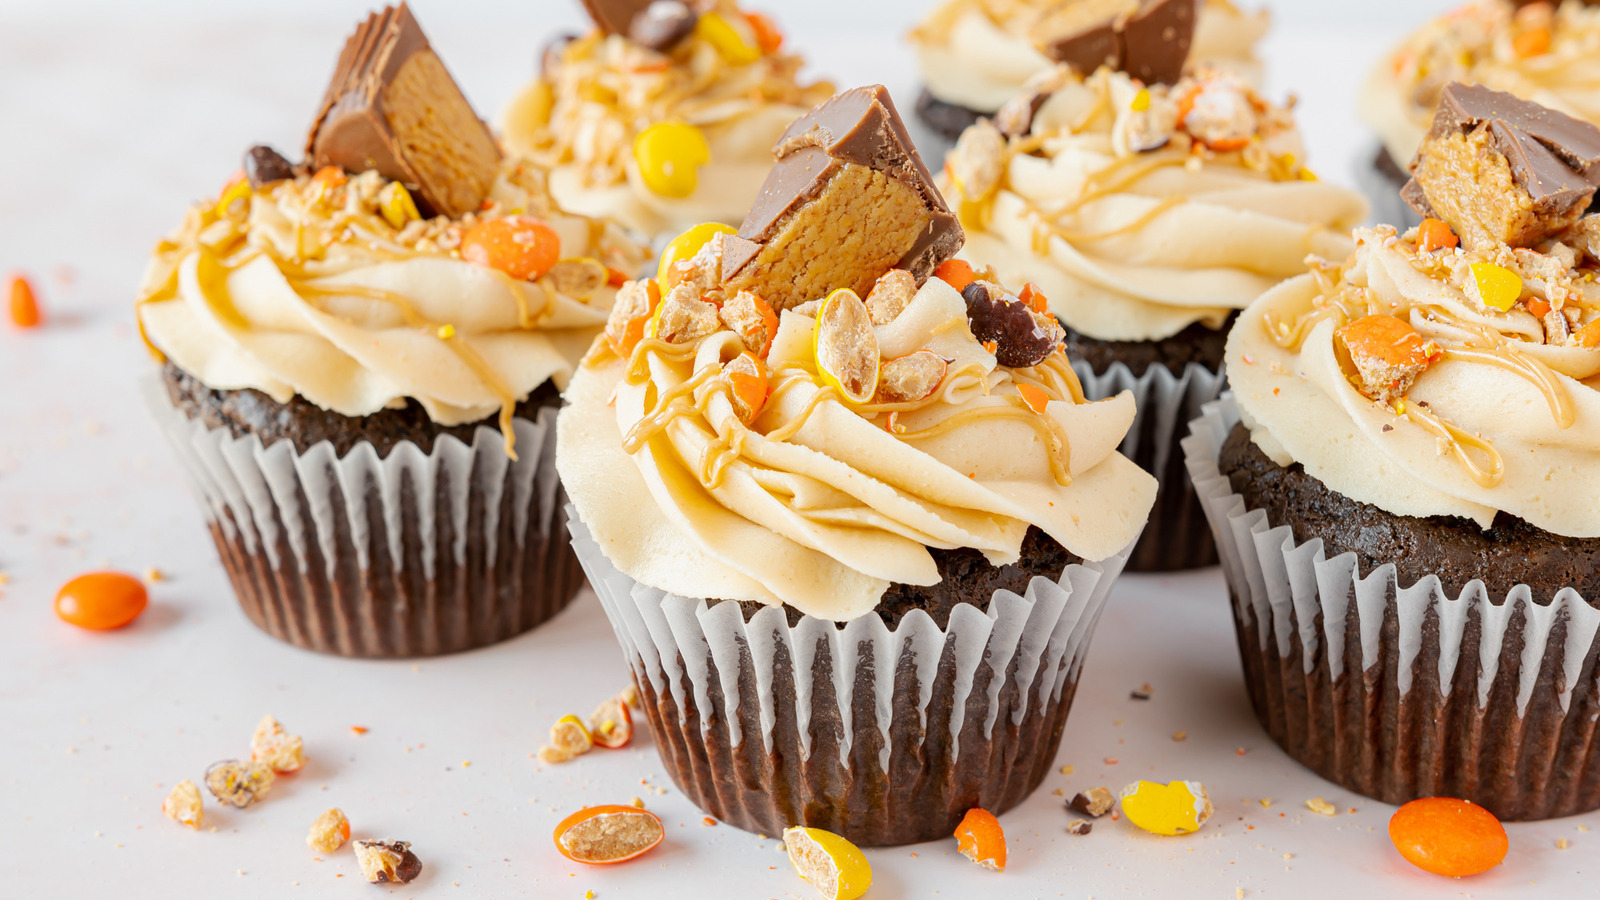 Maple Bacon Cupcakes - The Curly Spoon